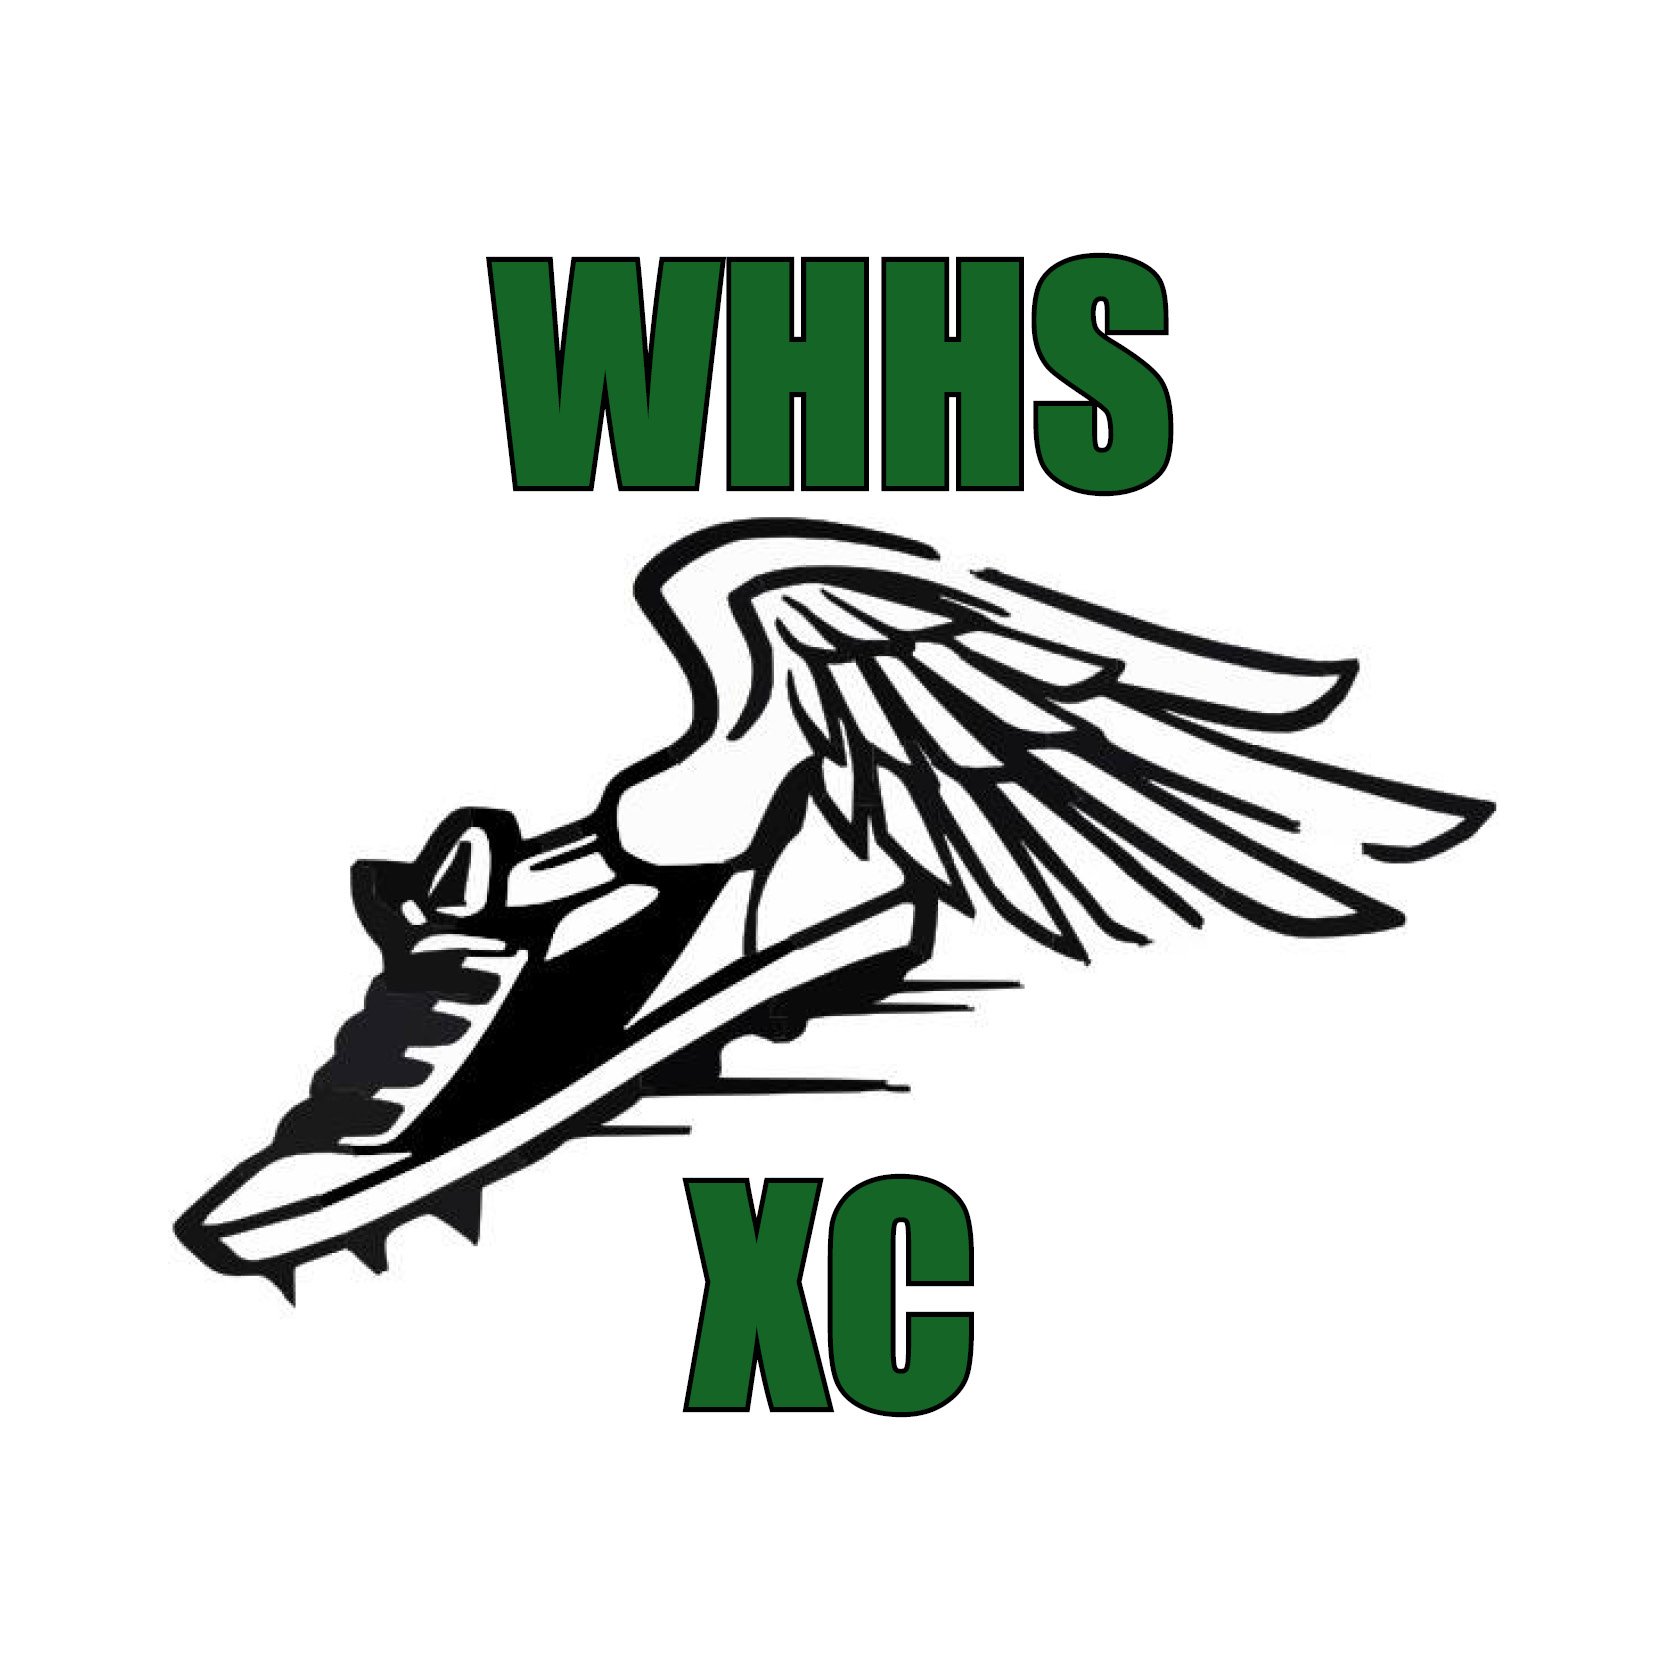 The official page of the Western Hills High School cross country team